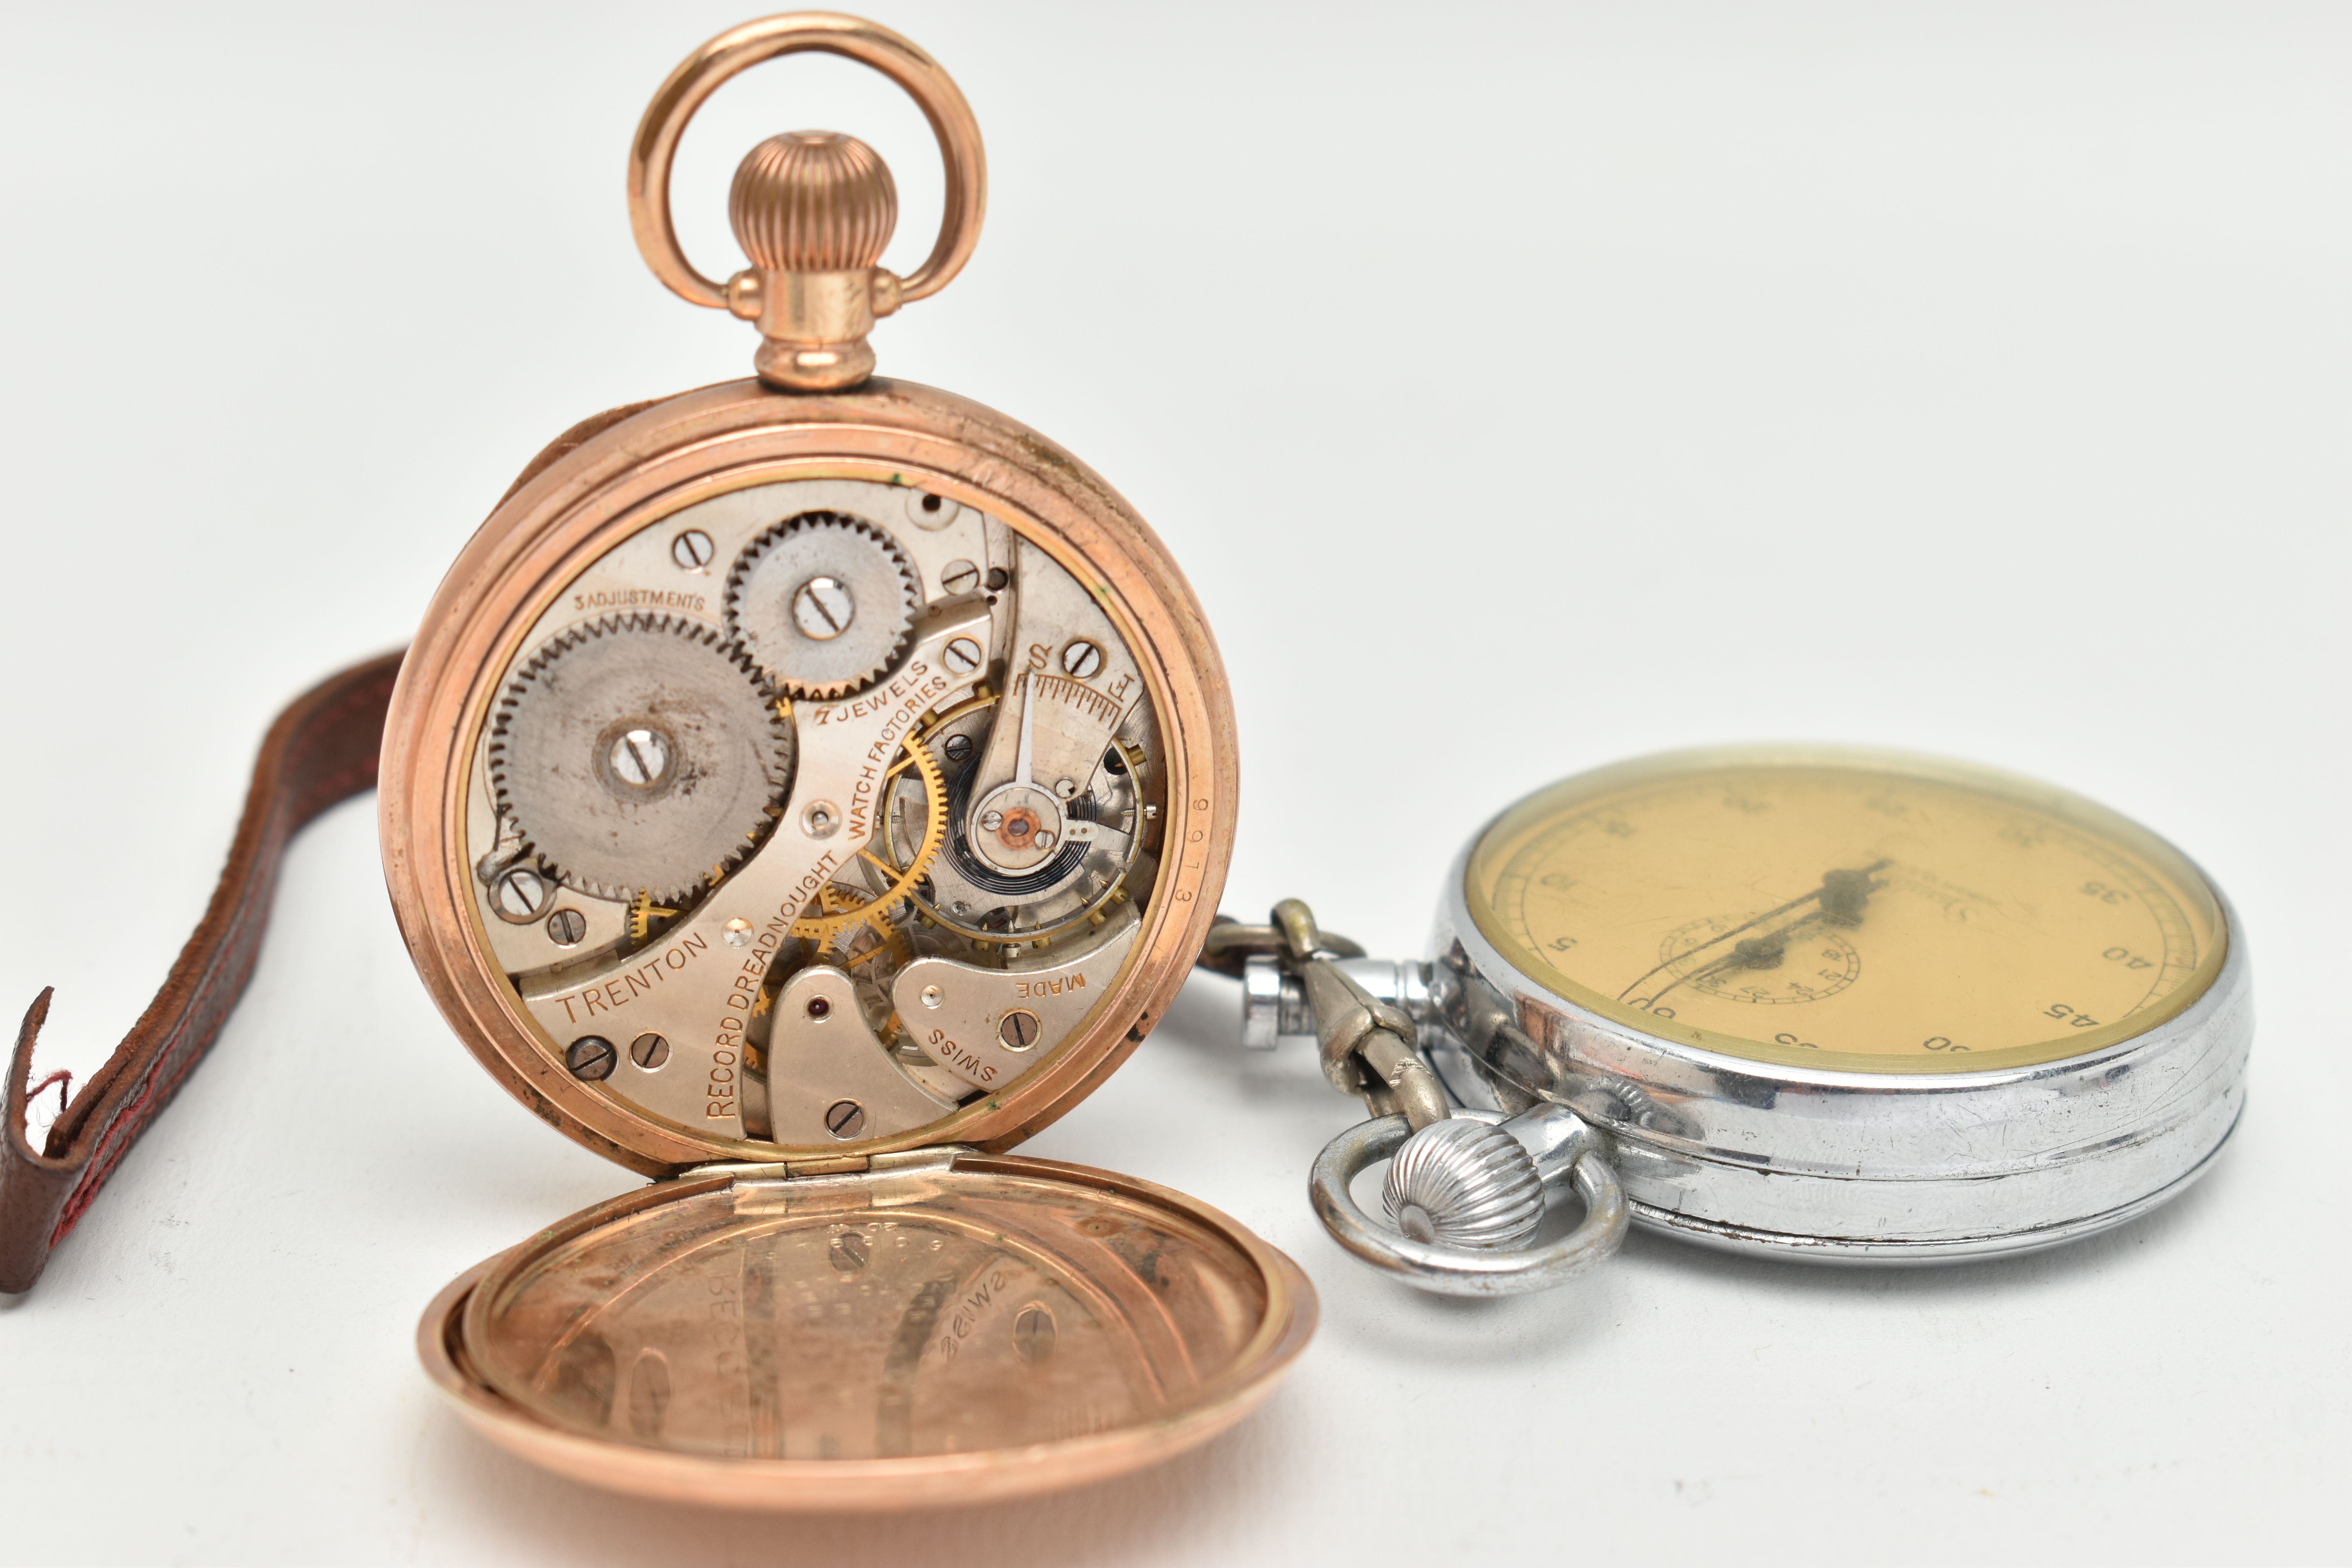 A ROLLED GOLD OPEN FACE POCKET WATCH AND A STOP WATCH, manual wind pocket watch, round white dial - Image 3 of 4